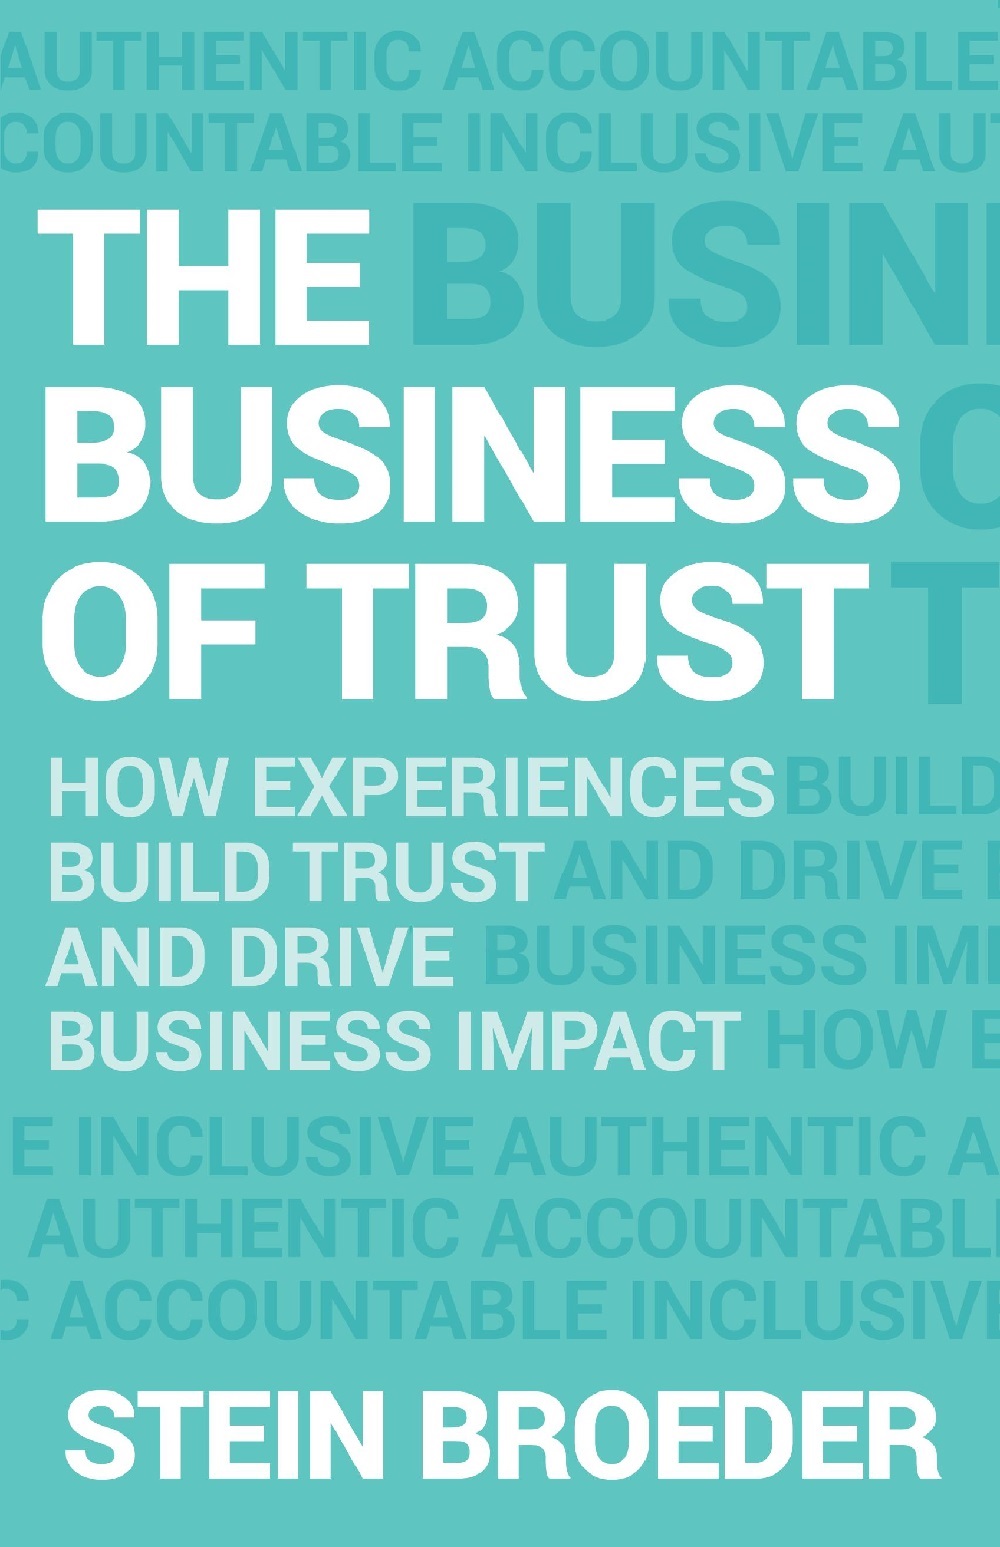 Book Excerpt: Why trust, not data, has become the most important asset in the modern economy